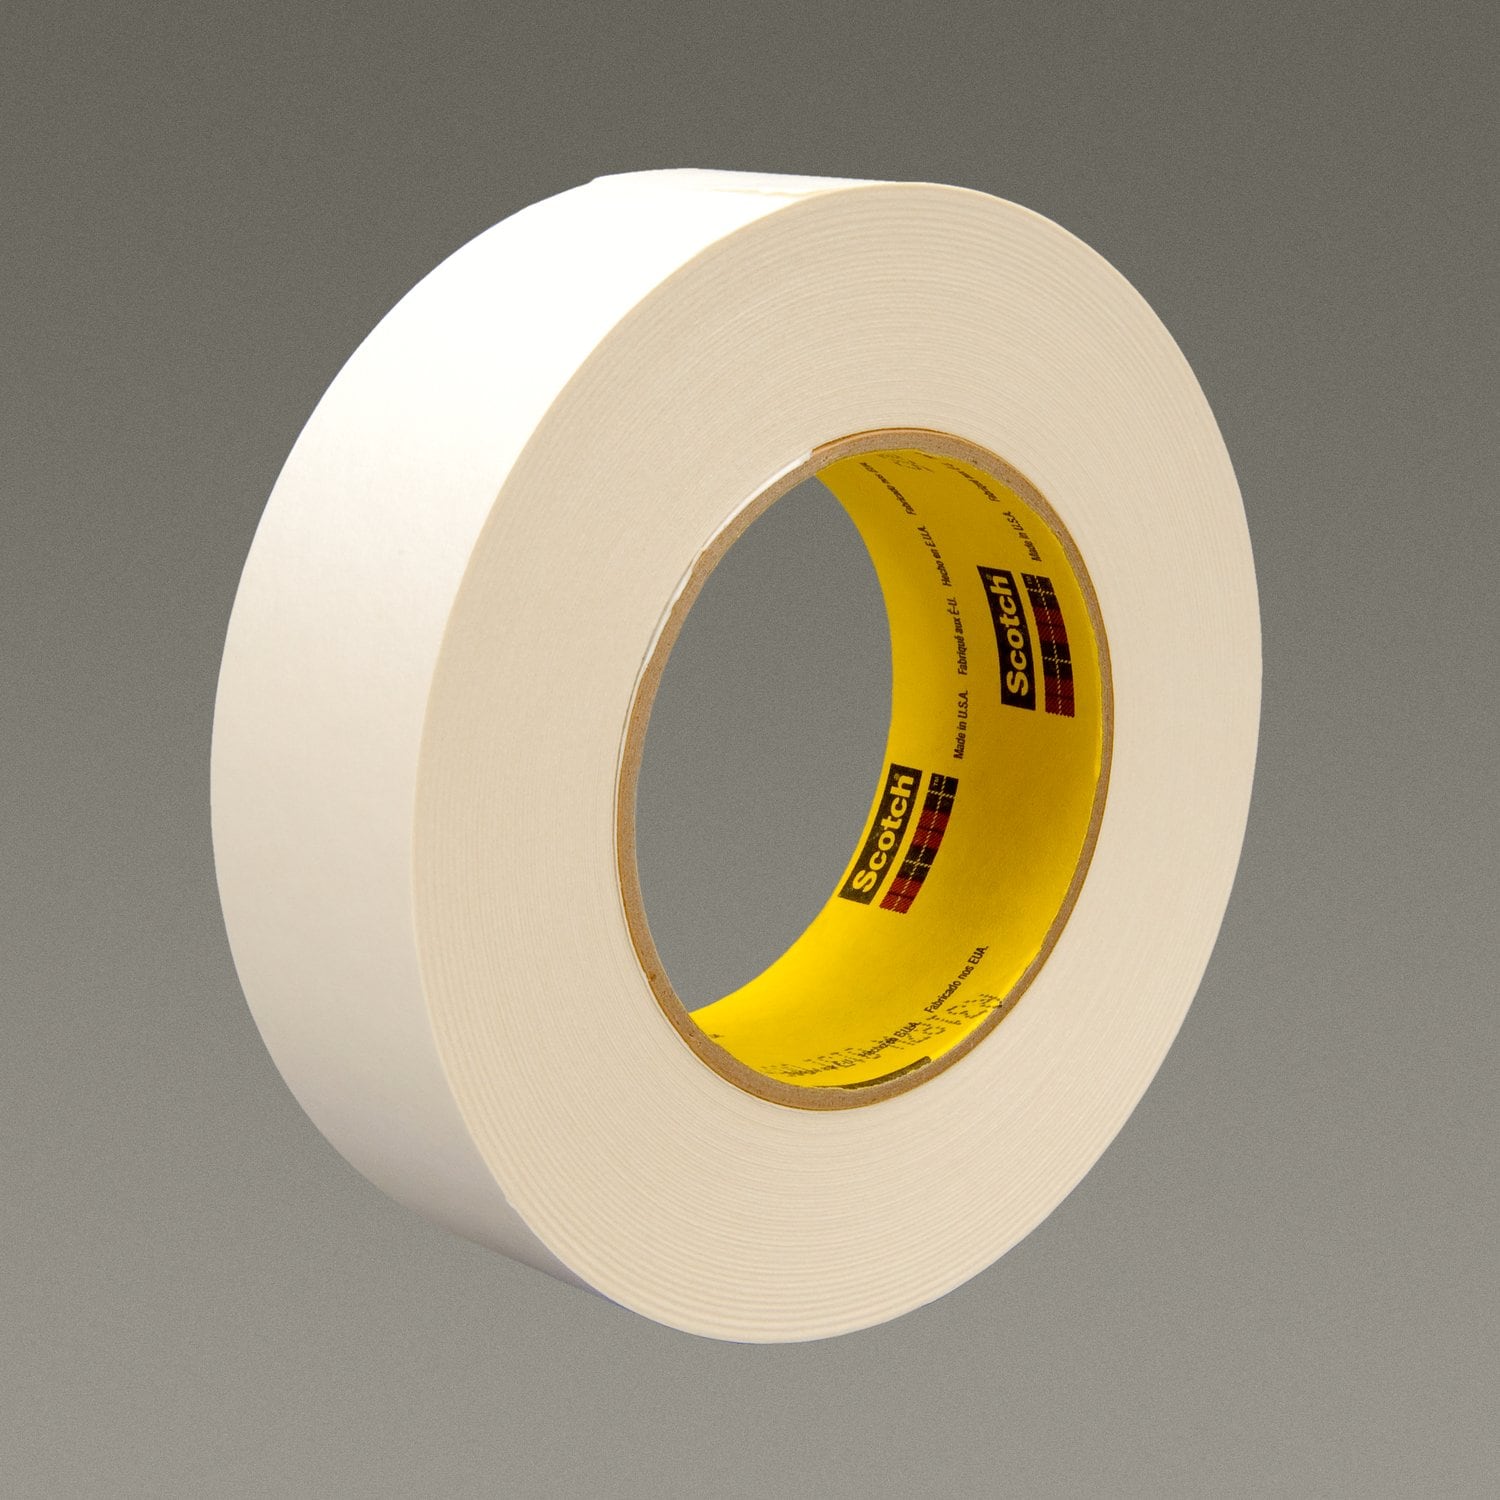 7100028049 - 3M Repulpable Strong Single Coated Tape R3187, White, 36 mm x 55 m, 7.5
mil, 24 rolls per case